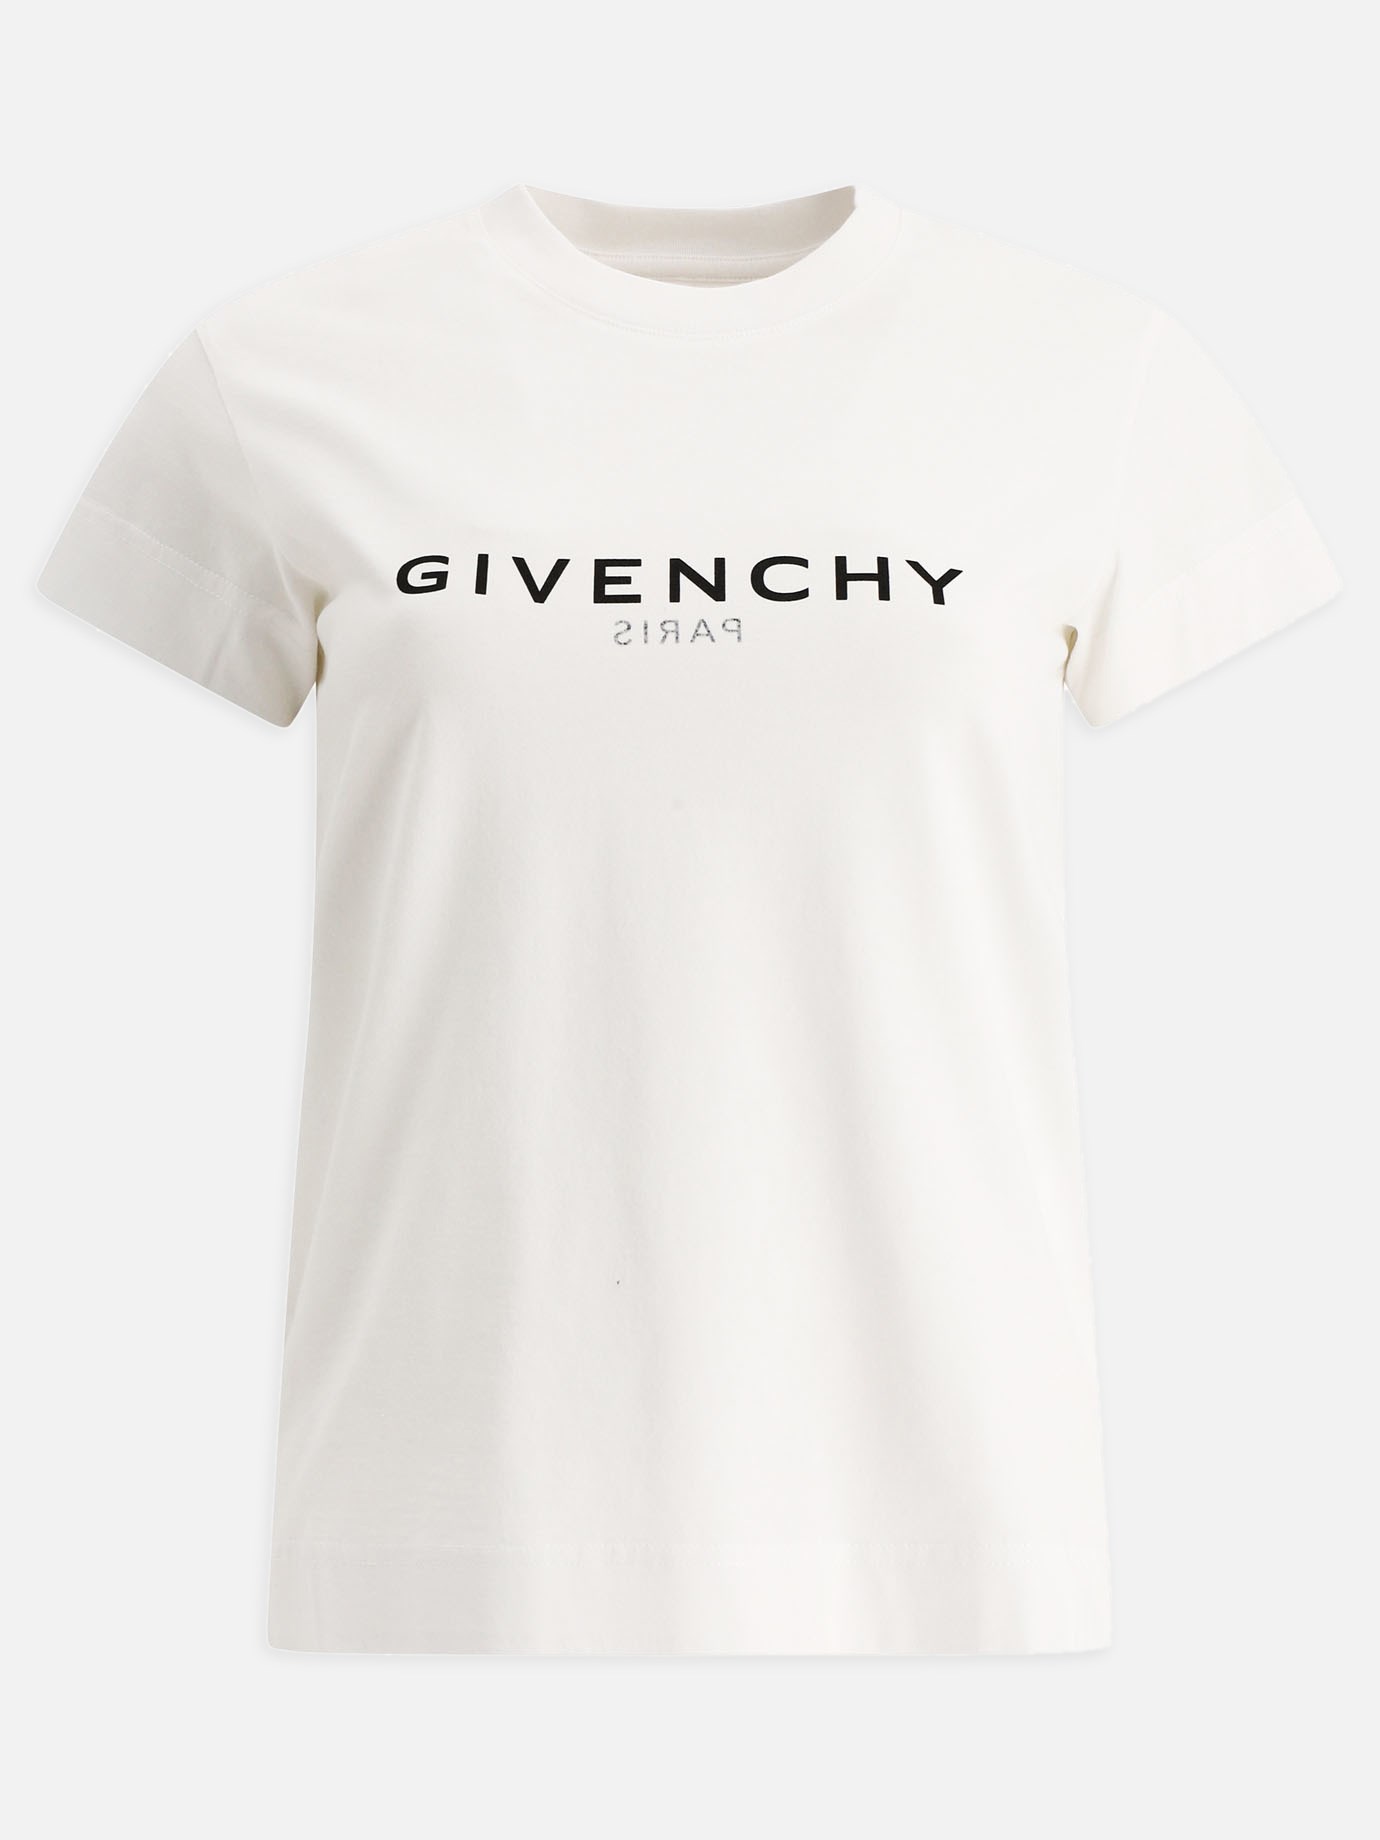  Givenchy Reverse  t-shirtby Givenchy - 0